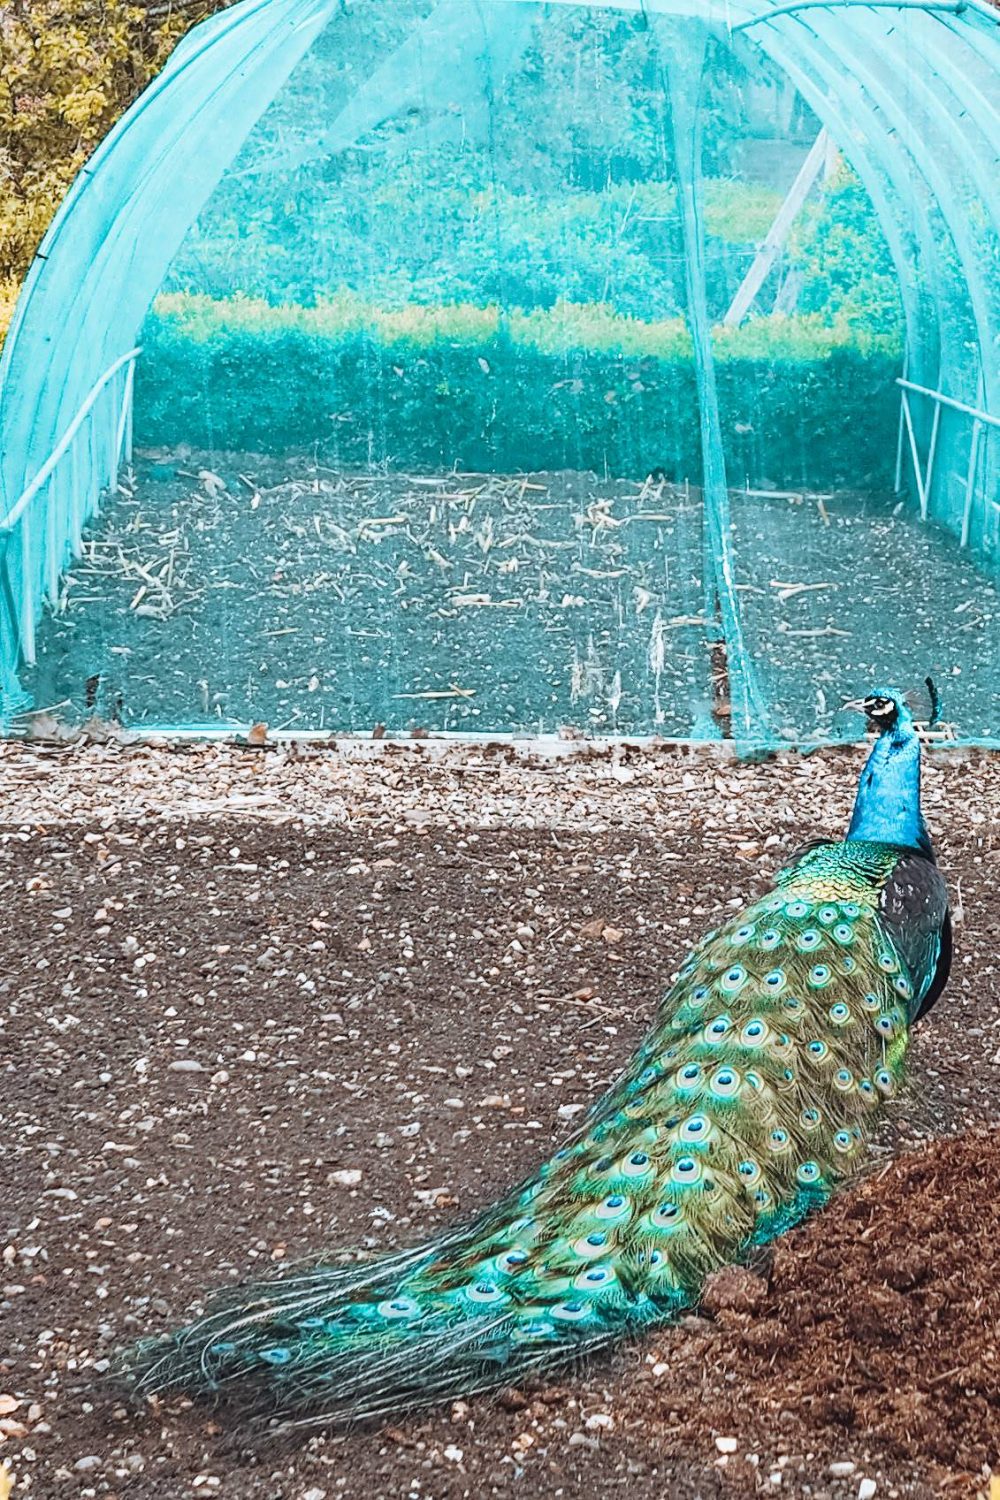 A peacock with his tail down